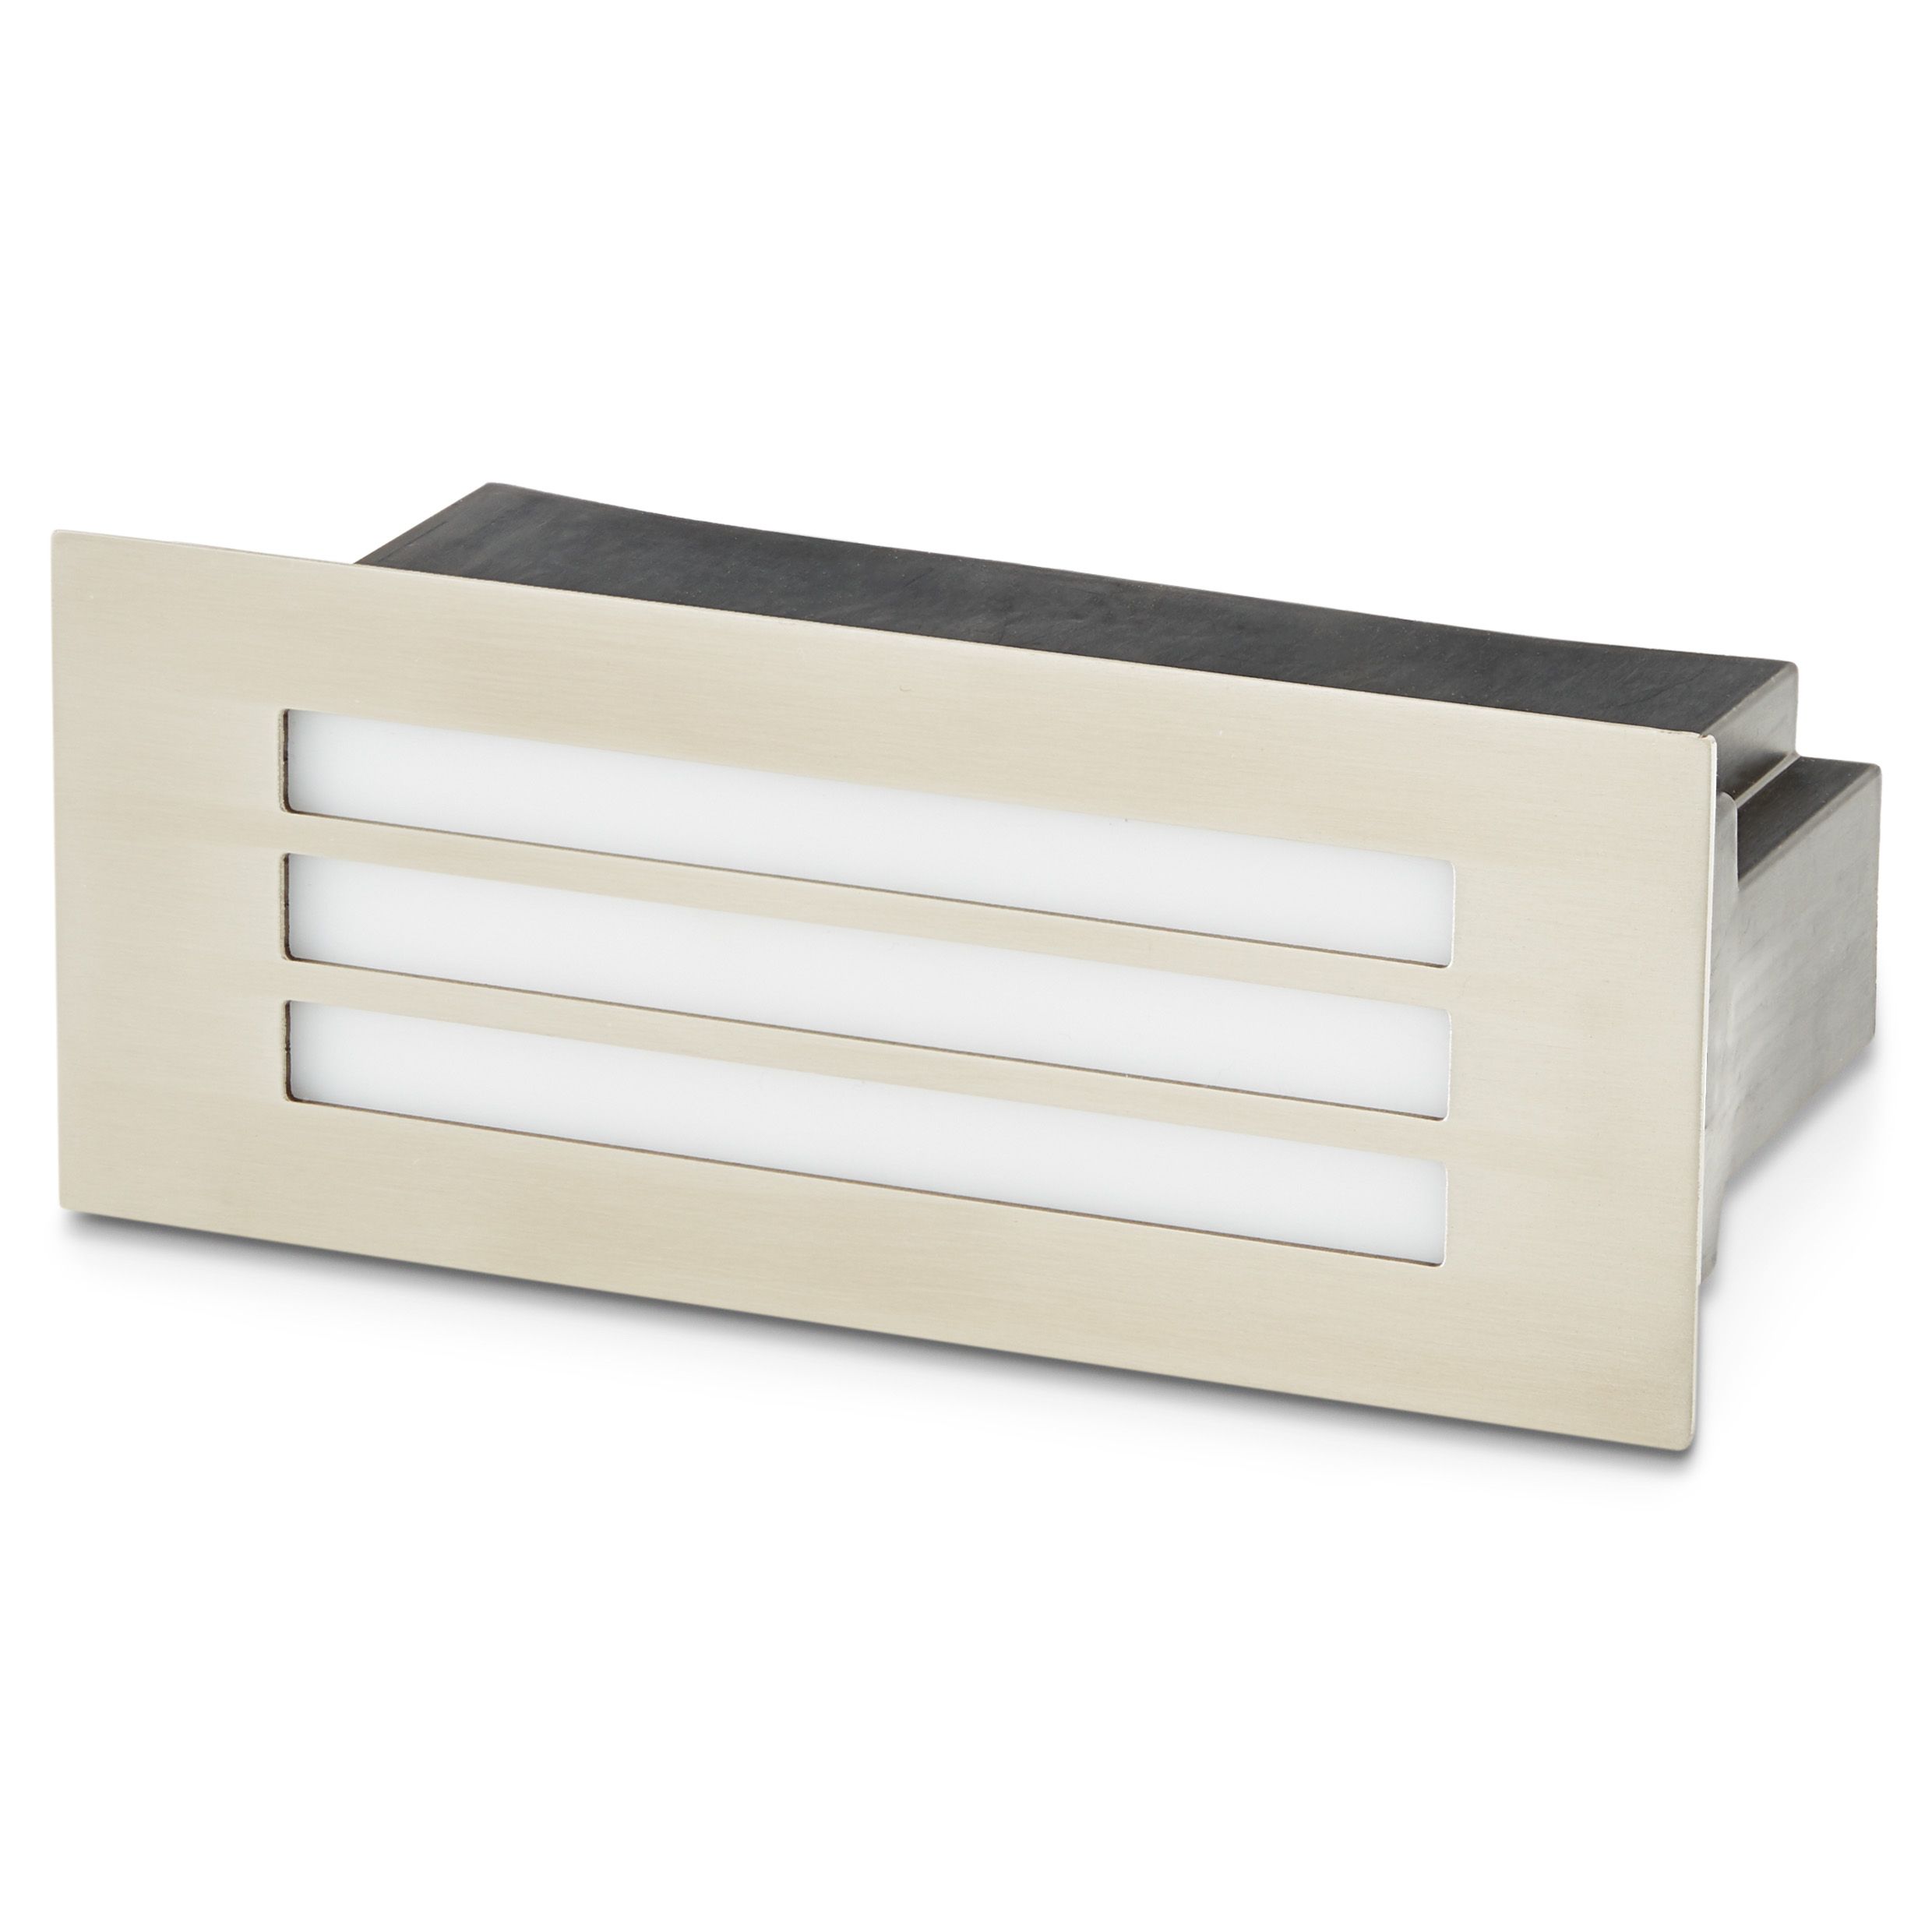 GoodHome Browning Stainless steel Mains-powered Neutral white LED Rectangular Deck light